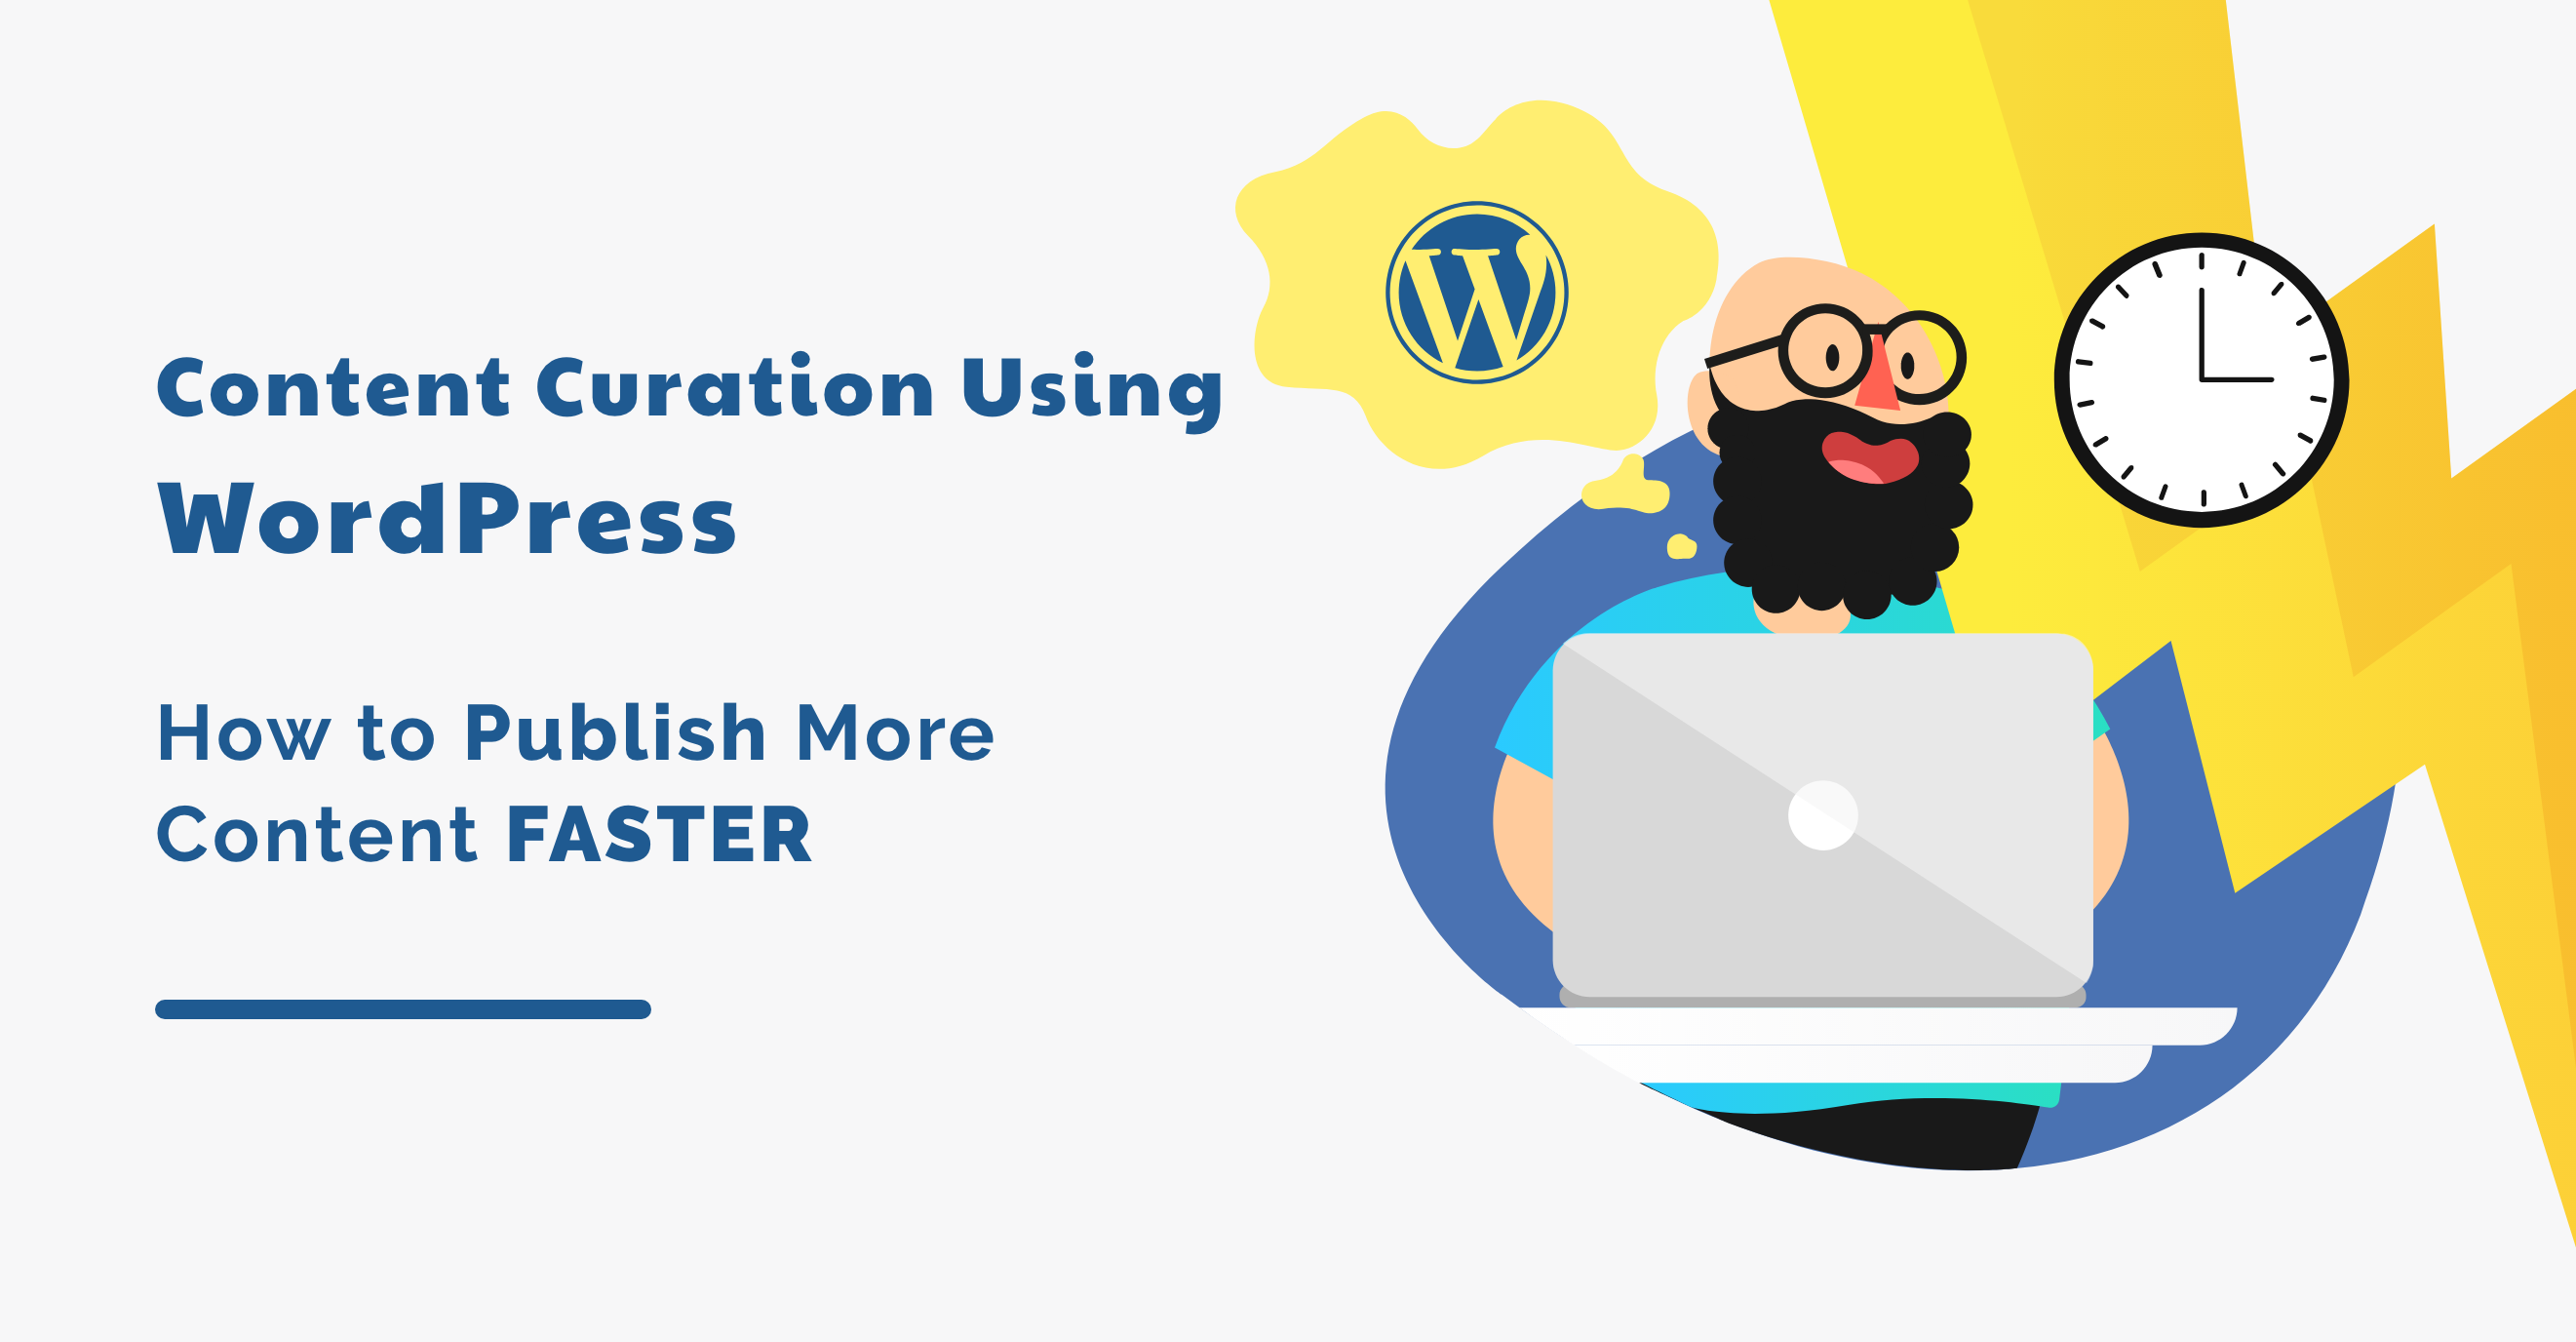 Content Curation Using WordPress: How to Publish More Content FASTER